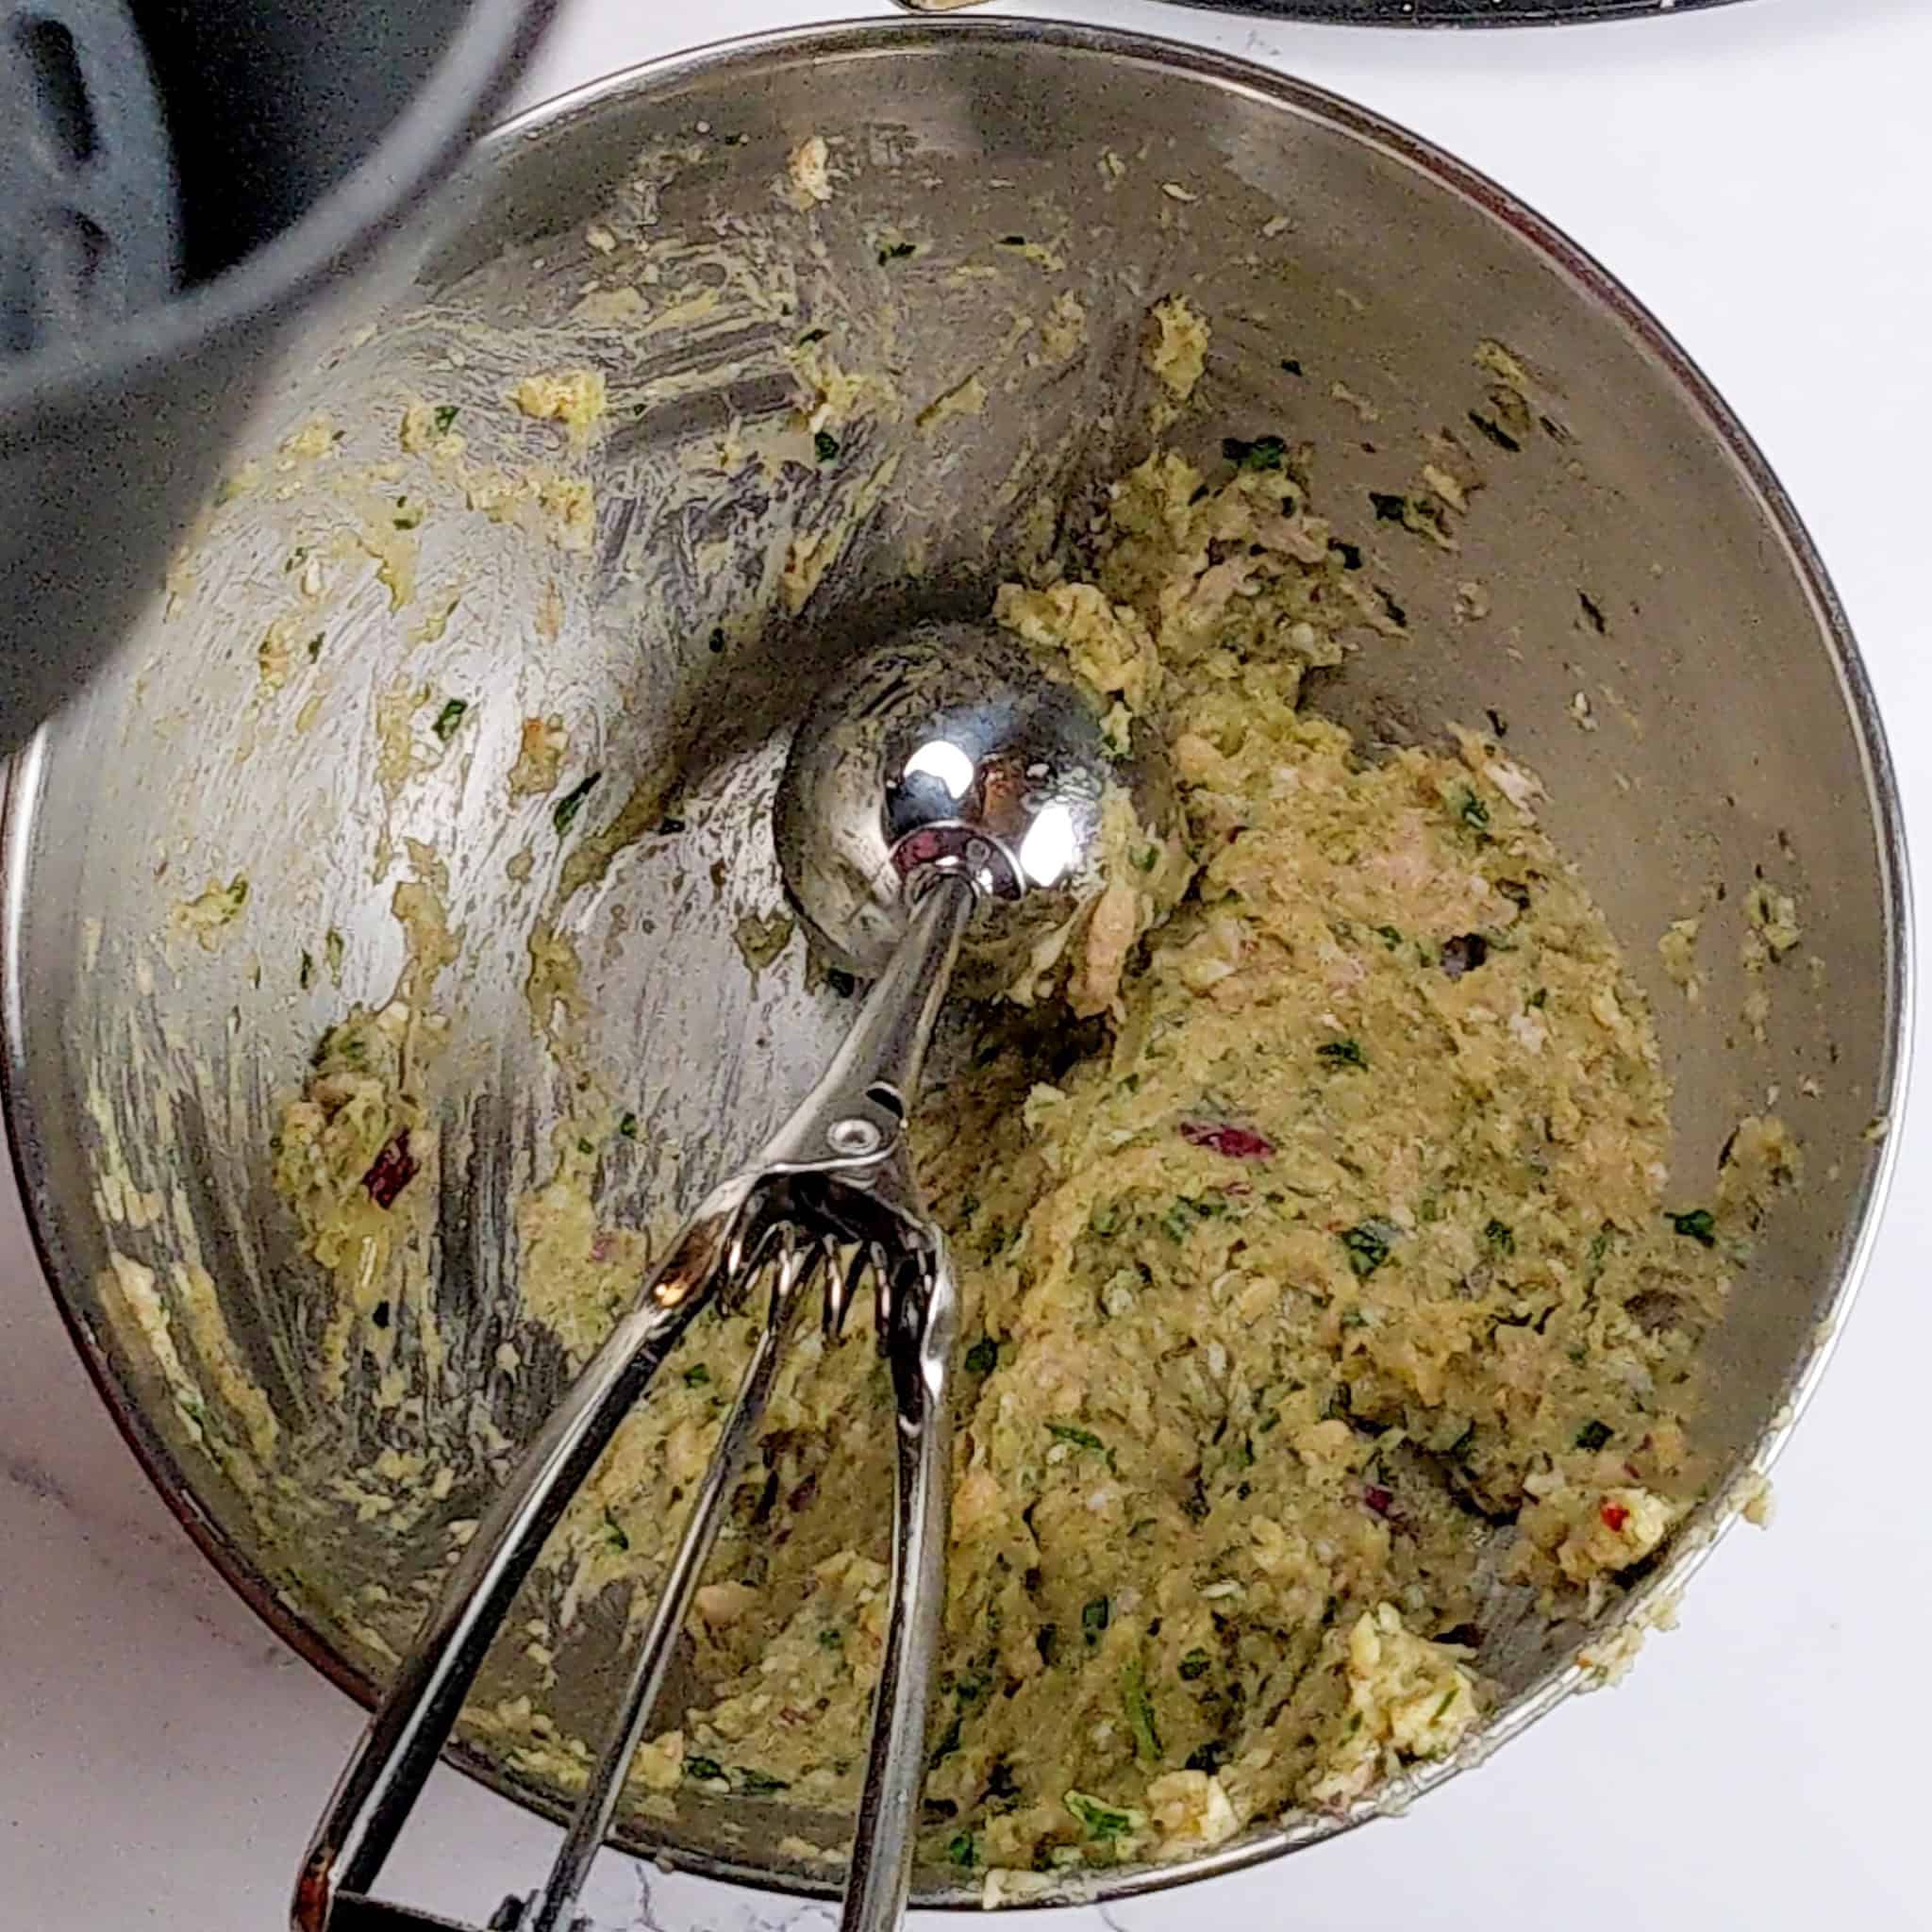 a medium cookie scoop resting in the stainless steel bowl of the raw meatball mixture.